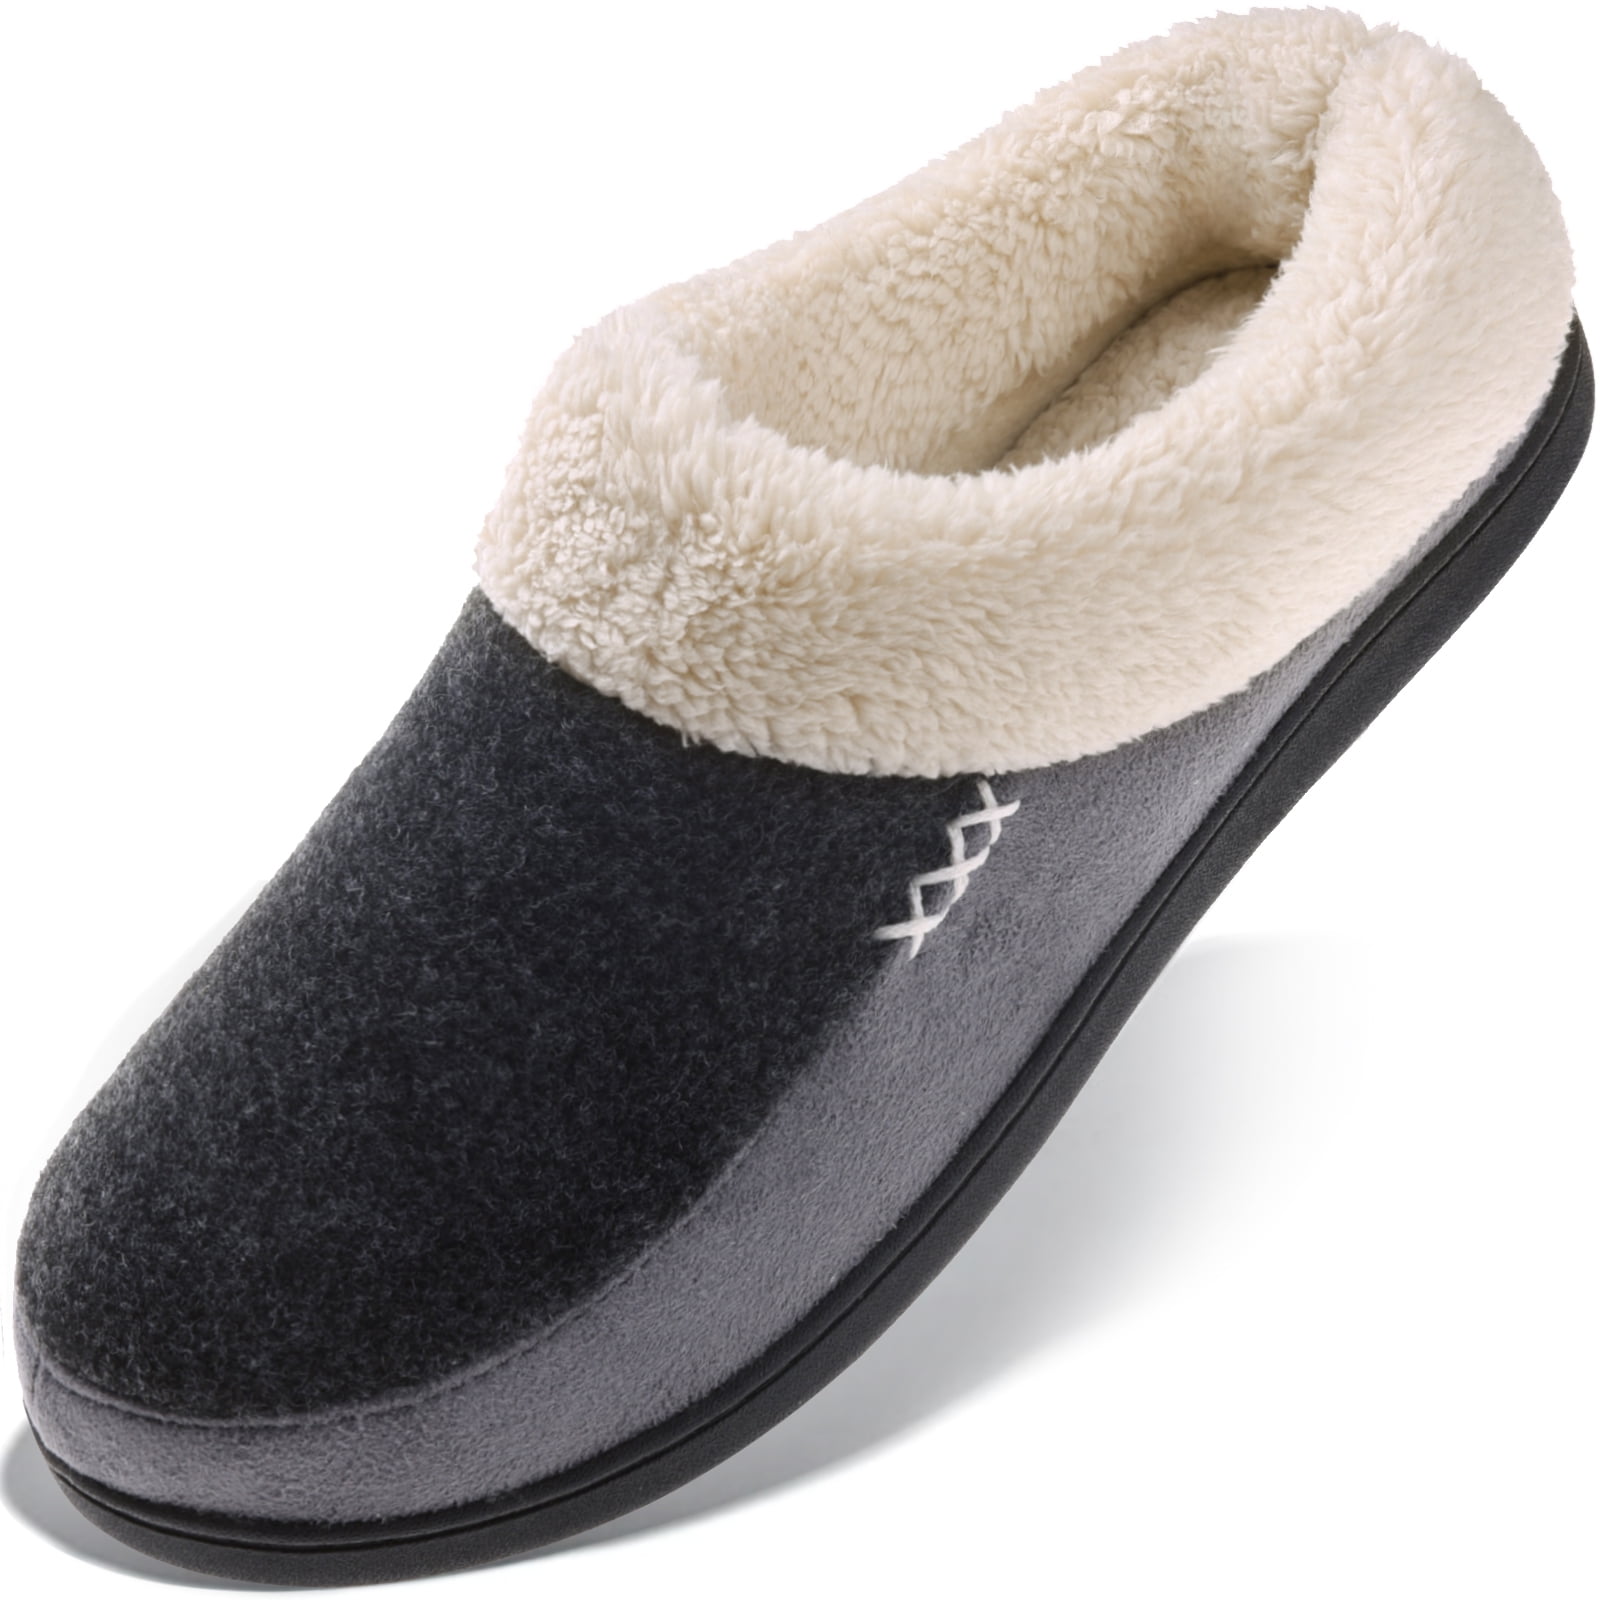 Mens Moccasins Faux Suede Textile Coolers Slippers Mule Mules Winter Chequered 